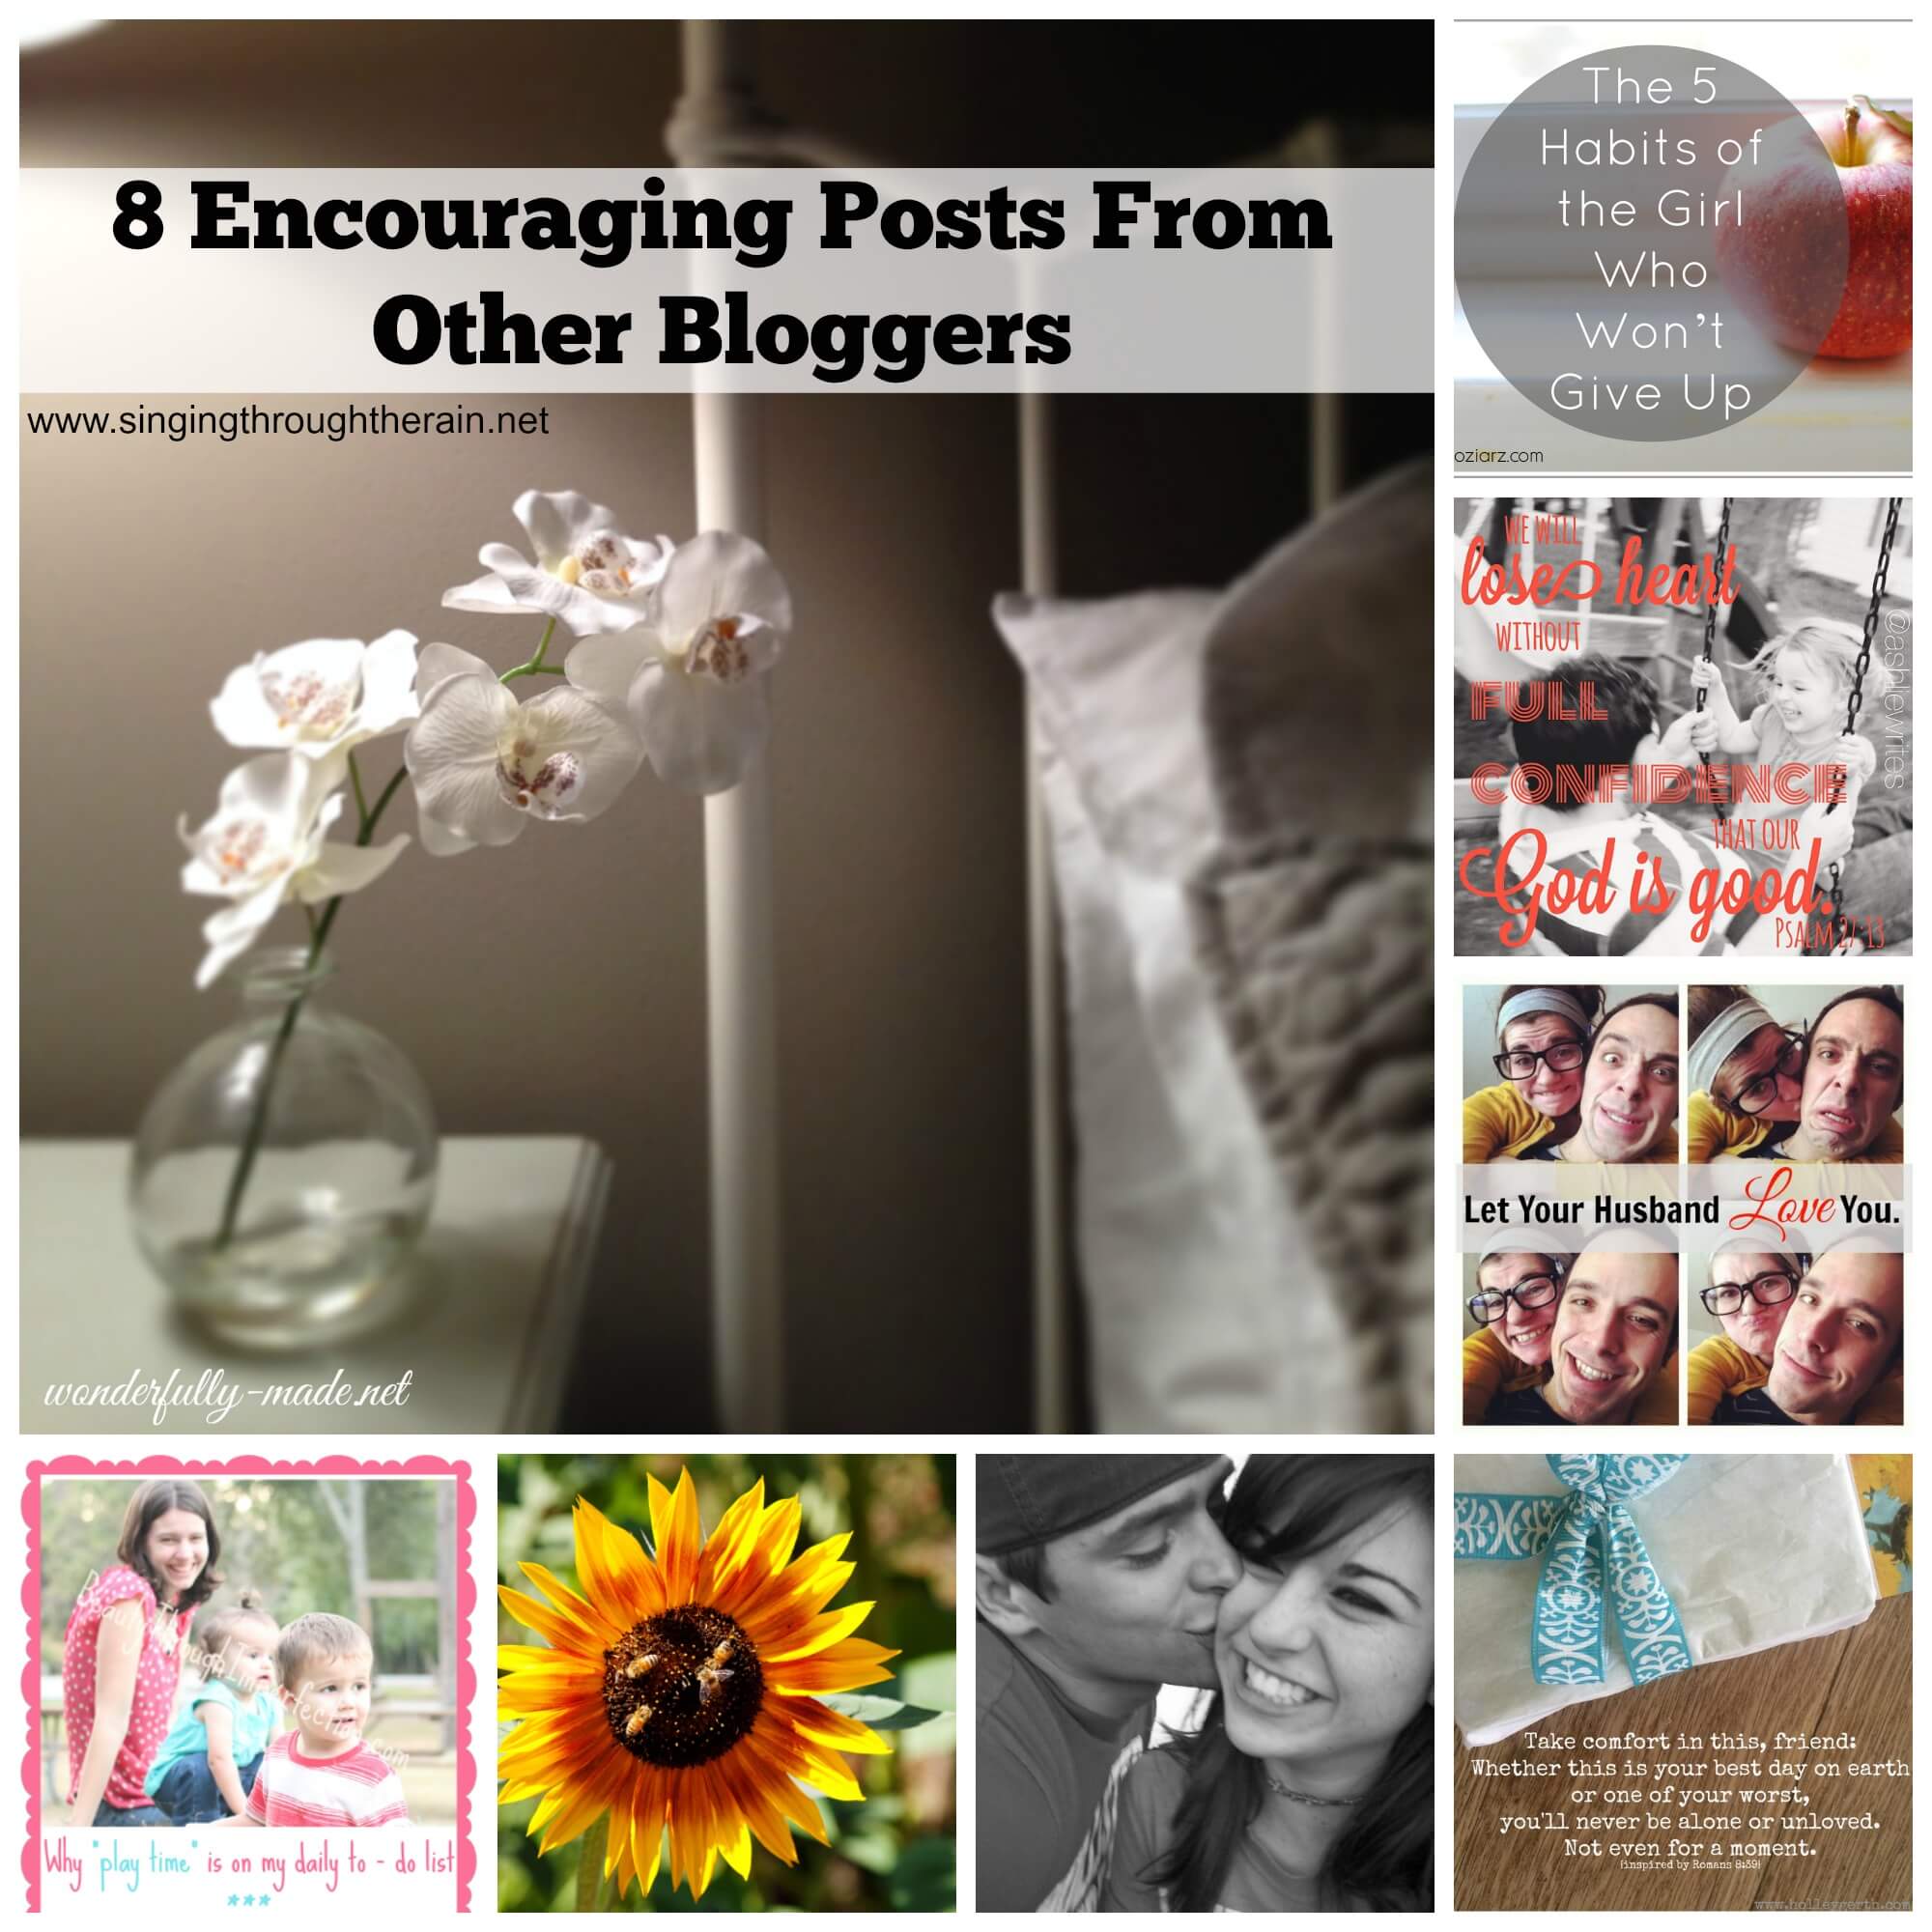 8 Encouraging Posts From Other Bloggers